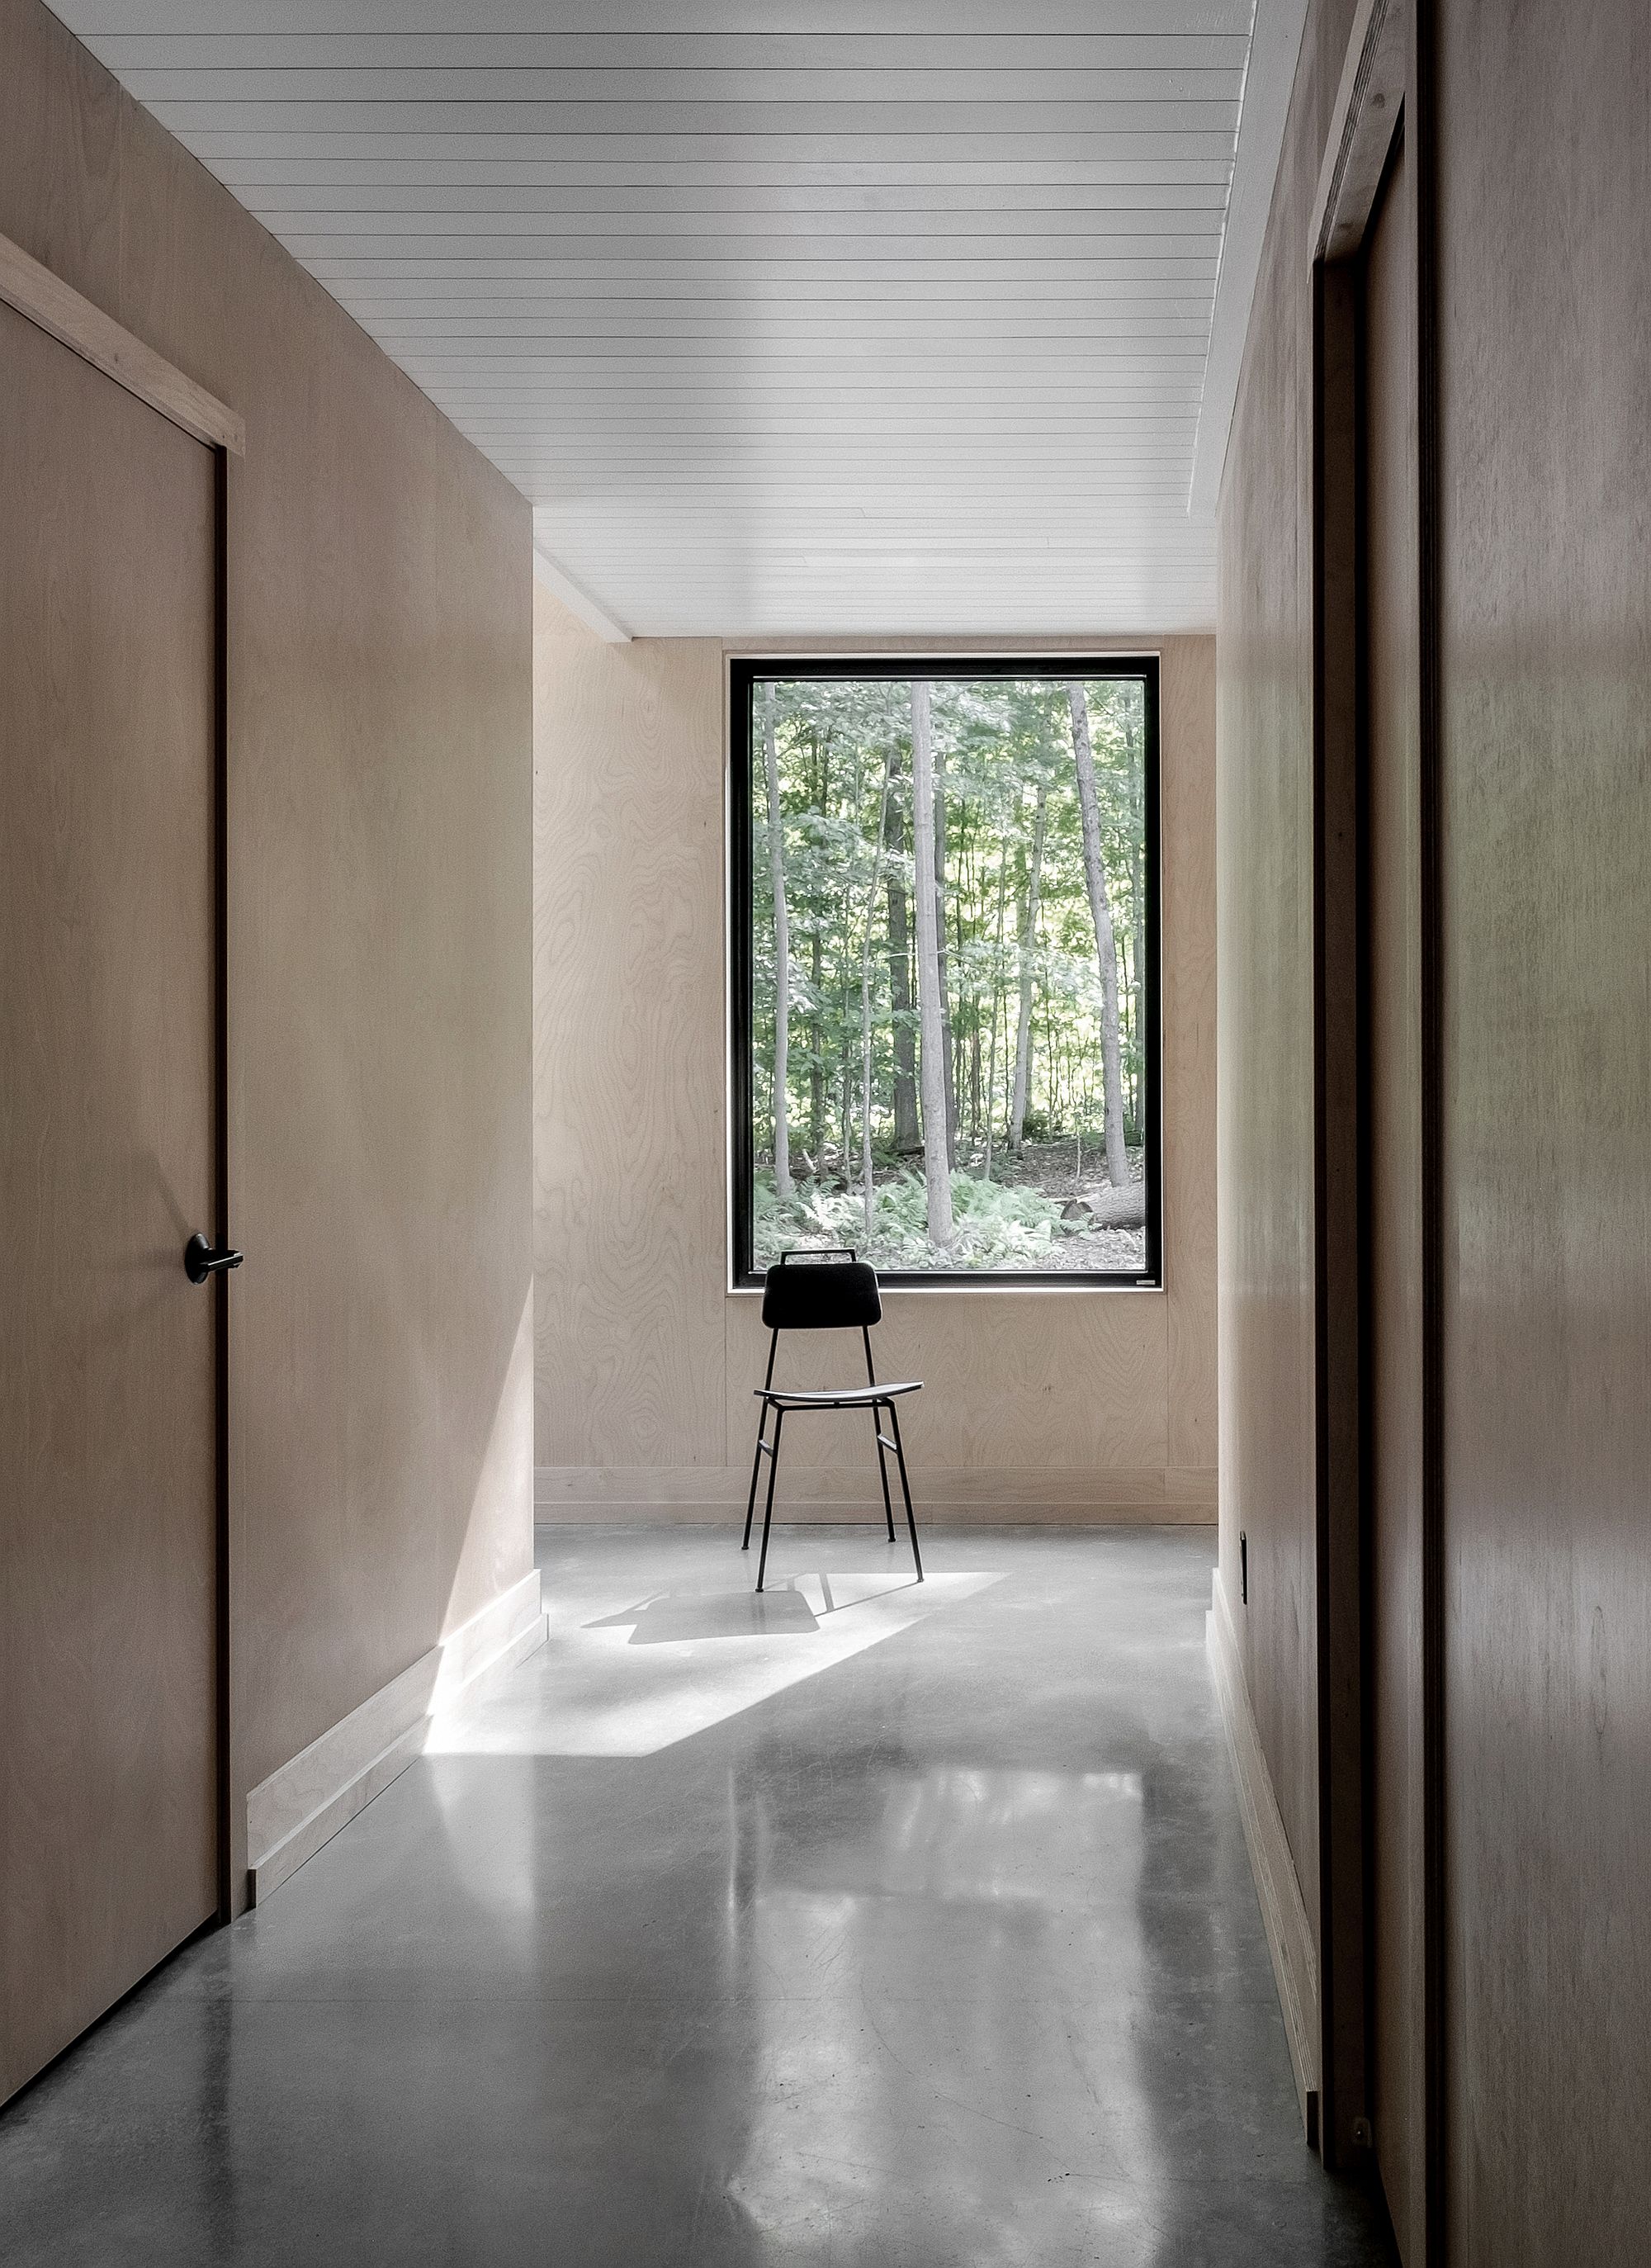 Sleek surfaces and Russian plywood shape the interior